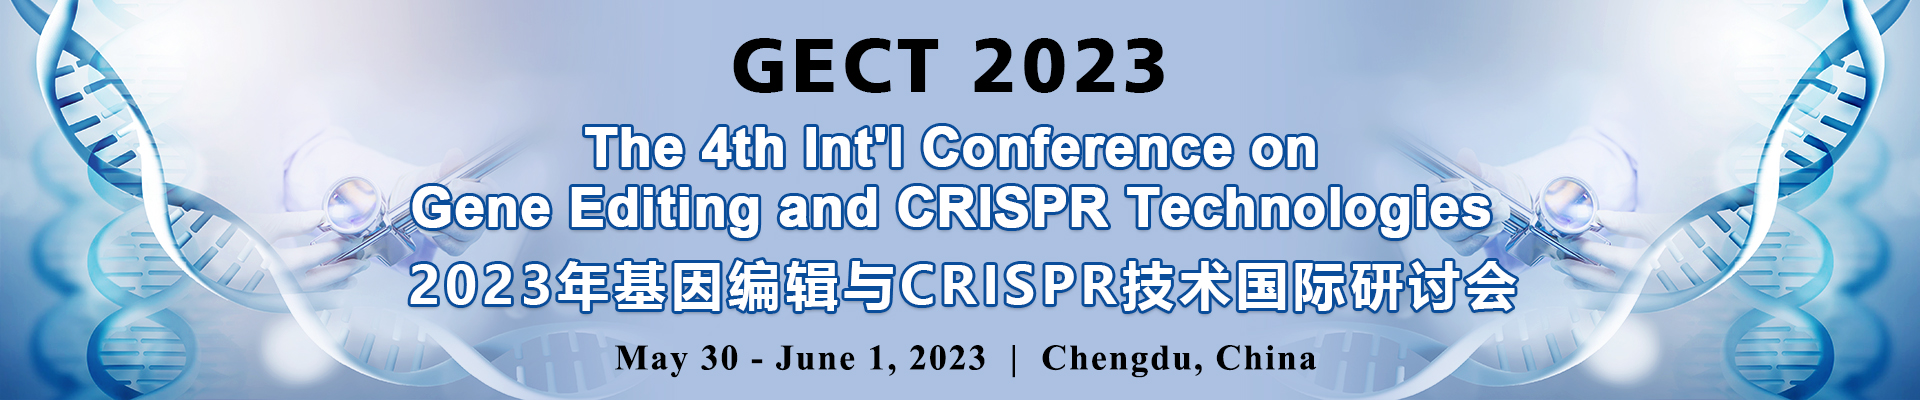 The 4th Int'l Conference on Gene Editing and CRISPR Technologies (GECT 2023), Chengdu, Sichuan, China